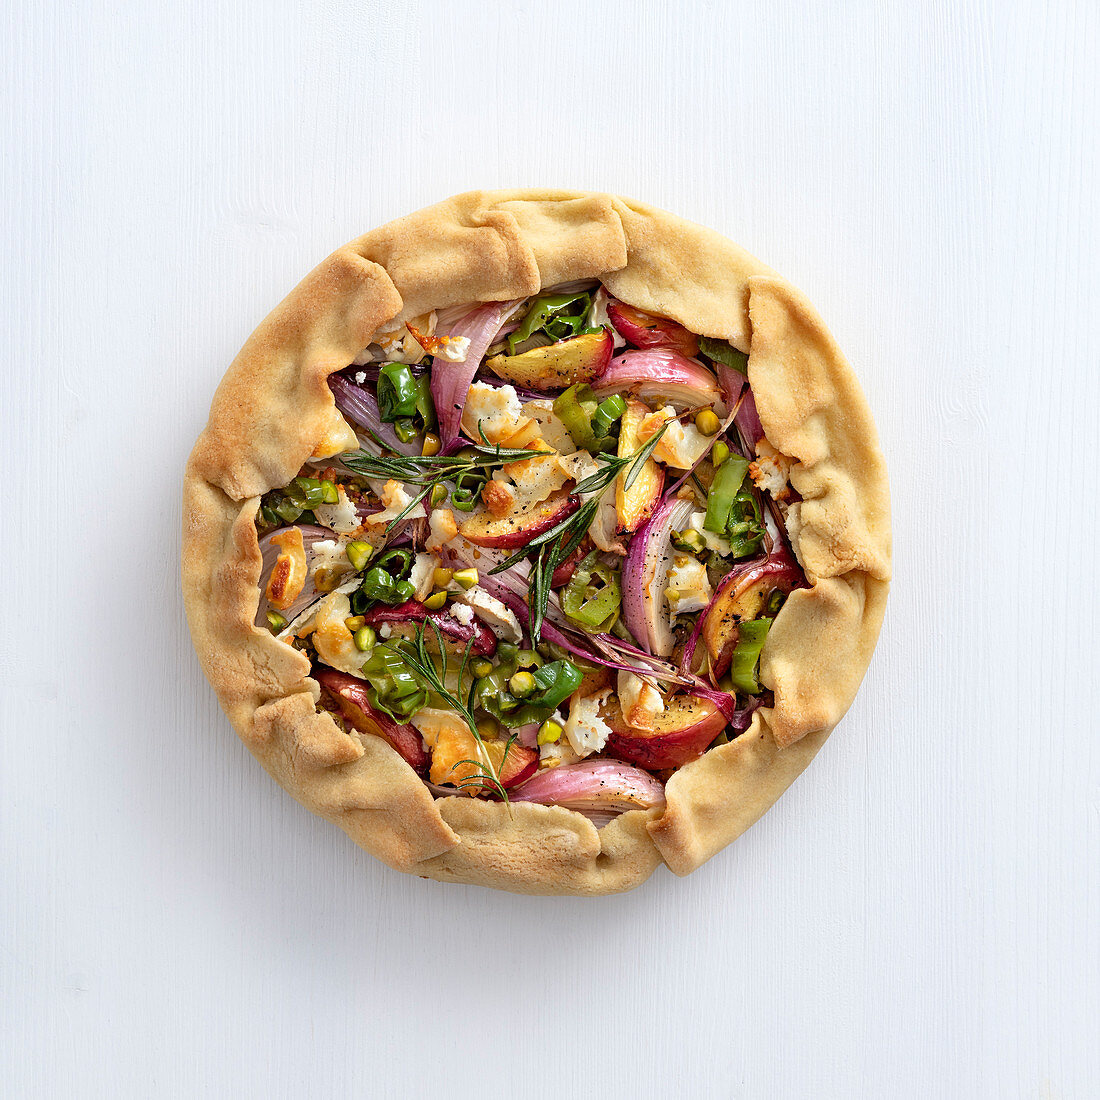 Onion tart with peaches, rosemary, goat's cheese and pistachio nuts